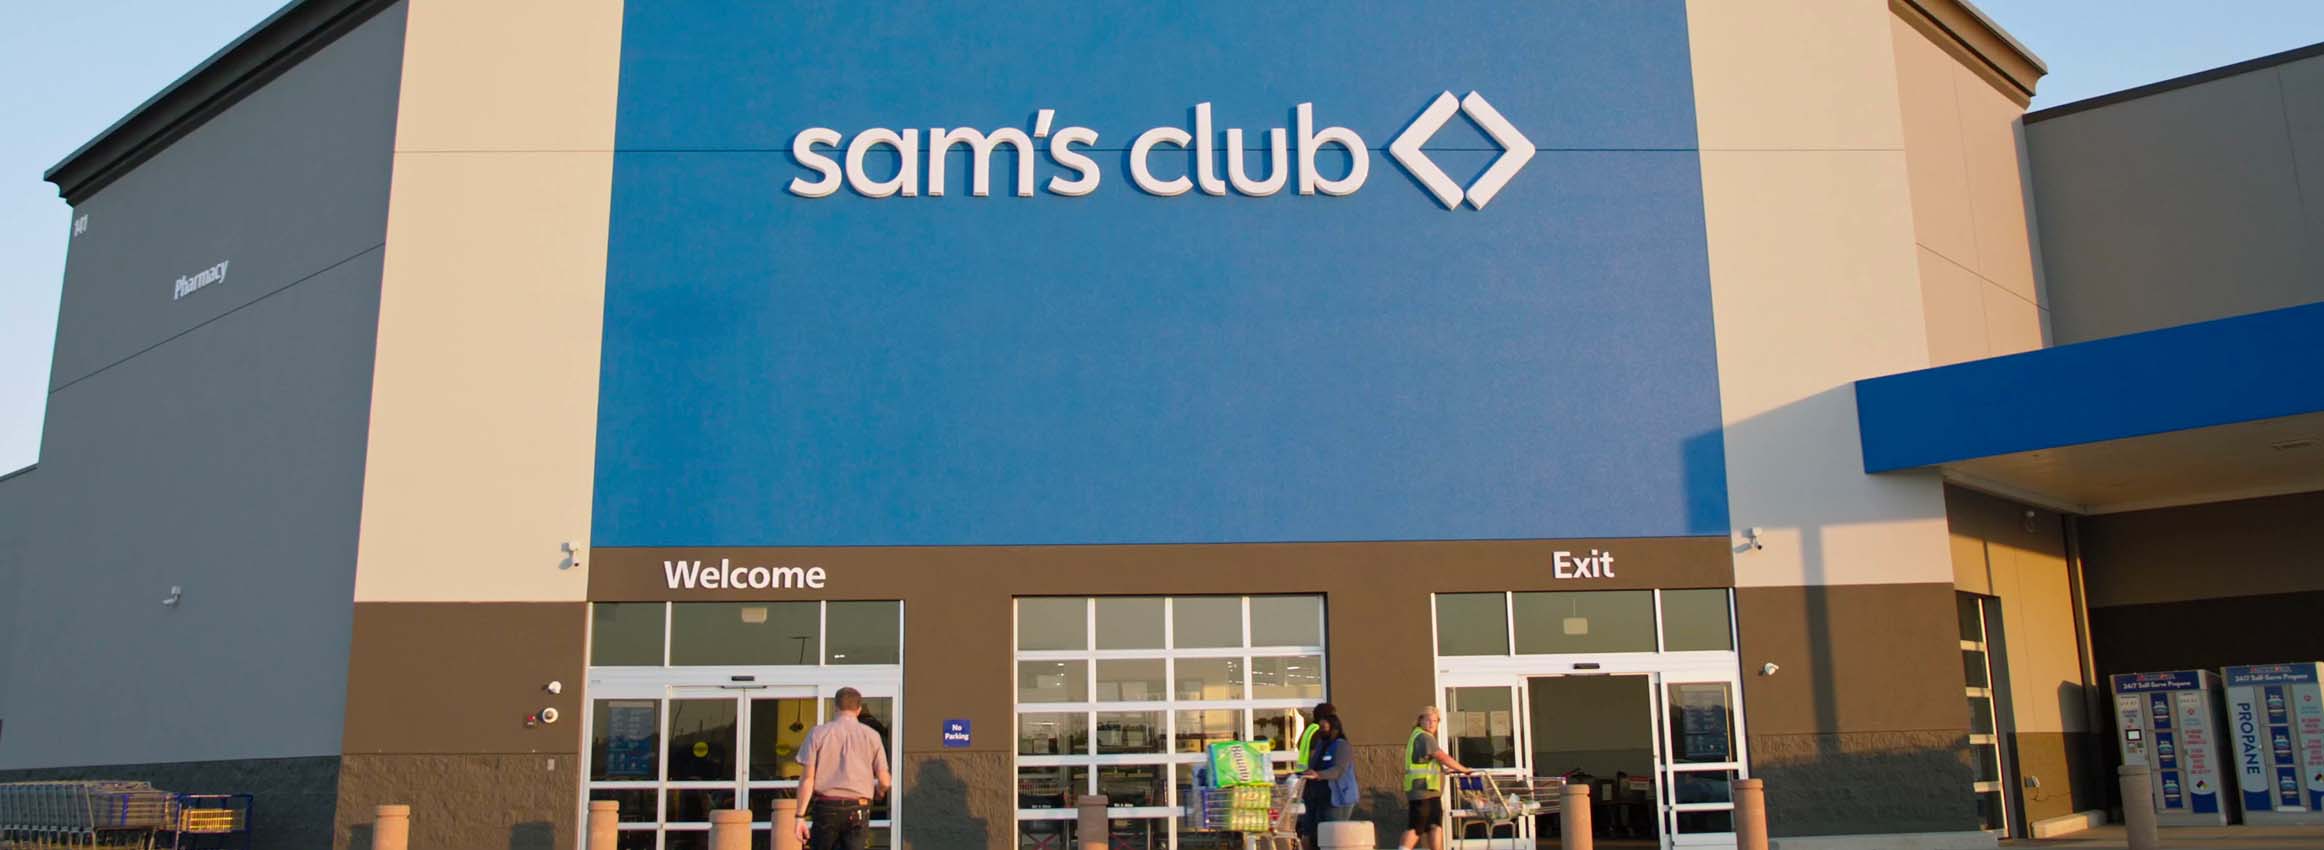 Sam’s Club Offers an Opportunity for Diverse-Owned Dry Grocery, Snacks, Pantry and Beverage Brands